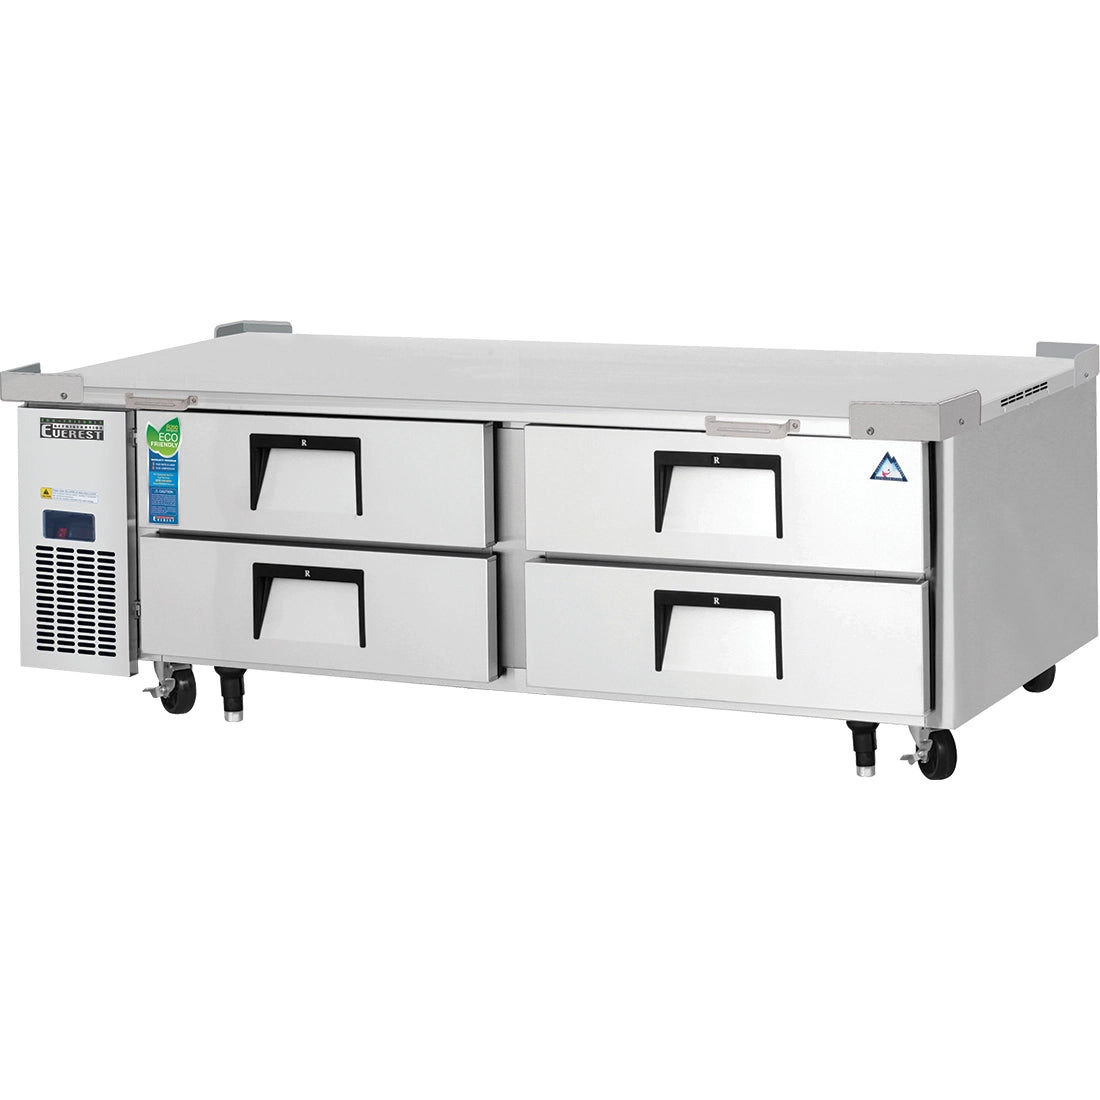 Everest EC Series-ECB72D4 Two Section Four Drawer Side Mount Refrigerated Chef Base - 115V